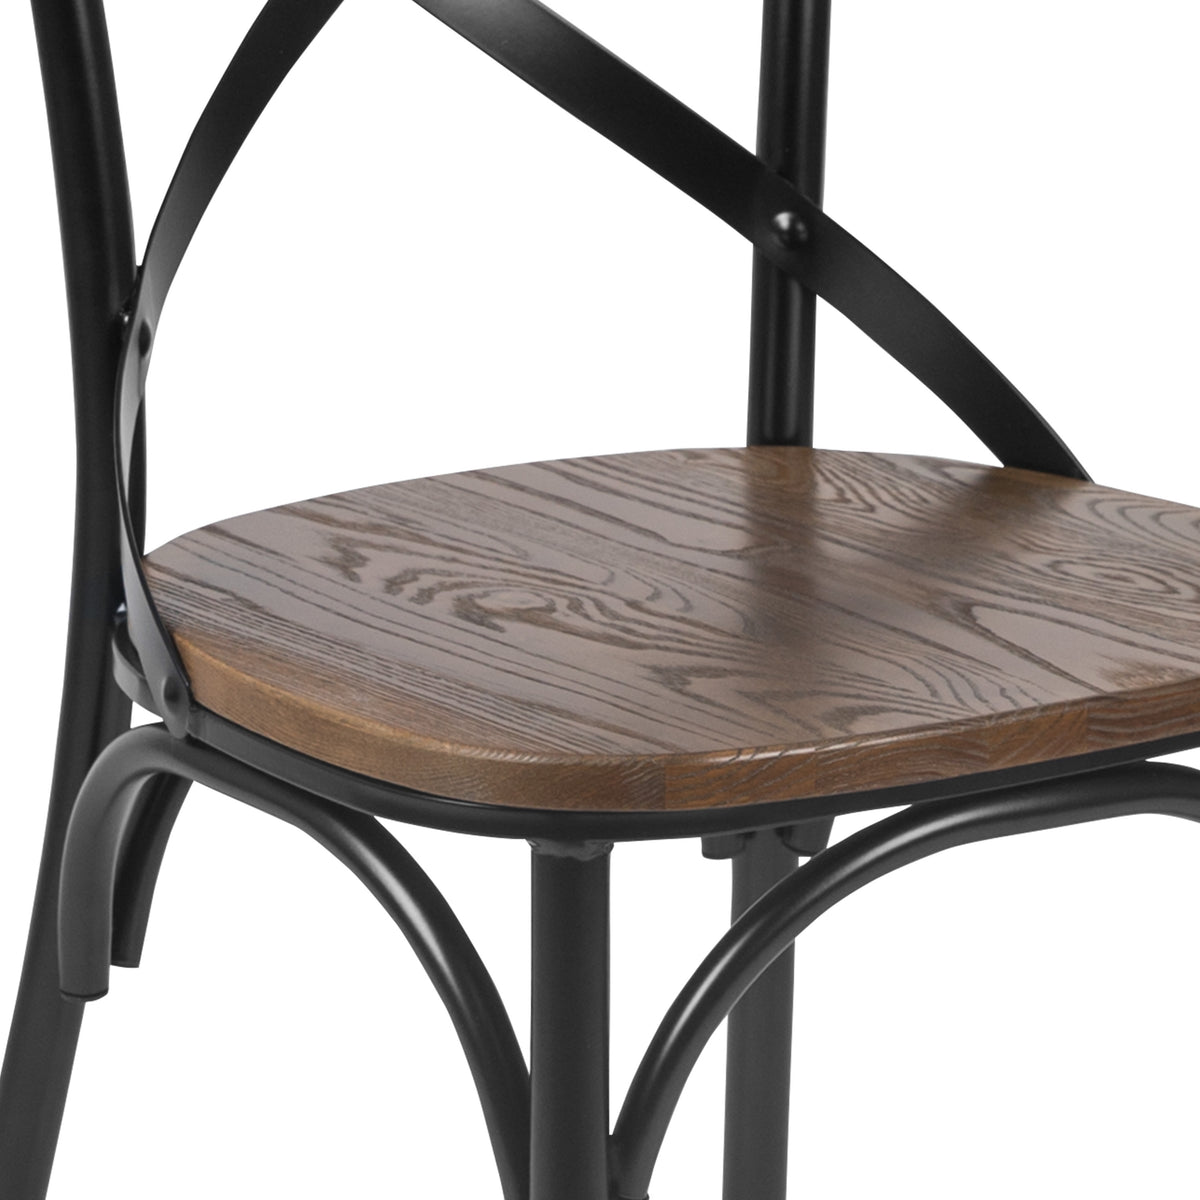 Black/Fruitwood |#| X-Back Black Metal Dining Restaurant Chair with Fruitwood Seat